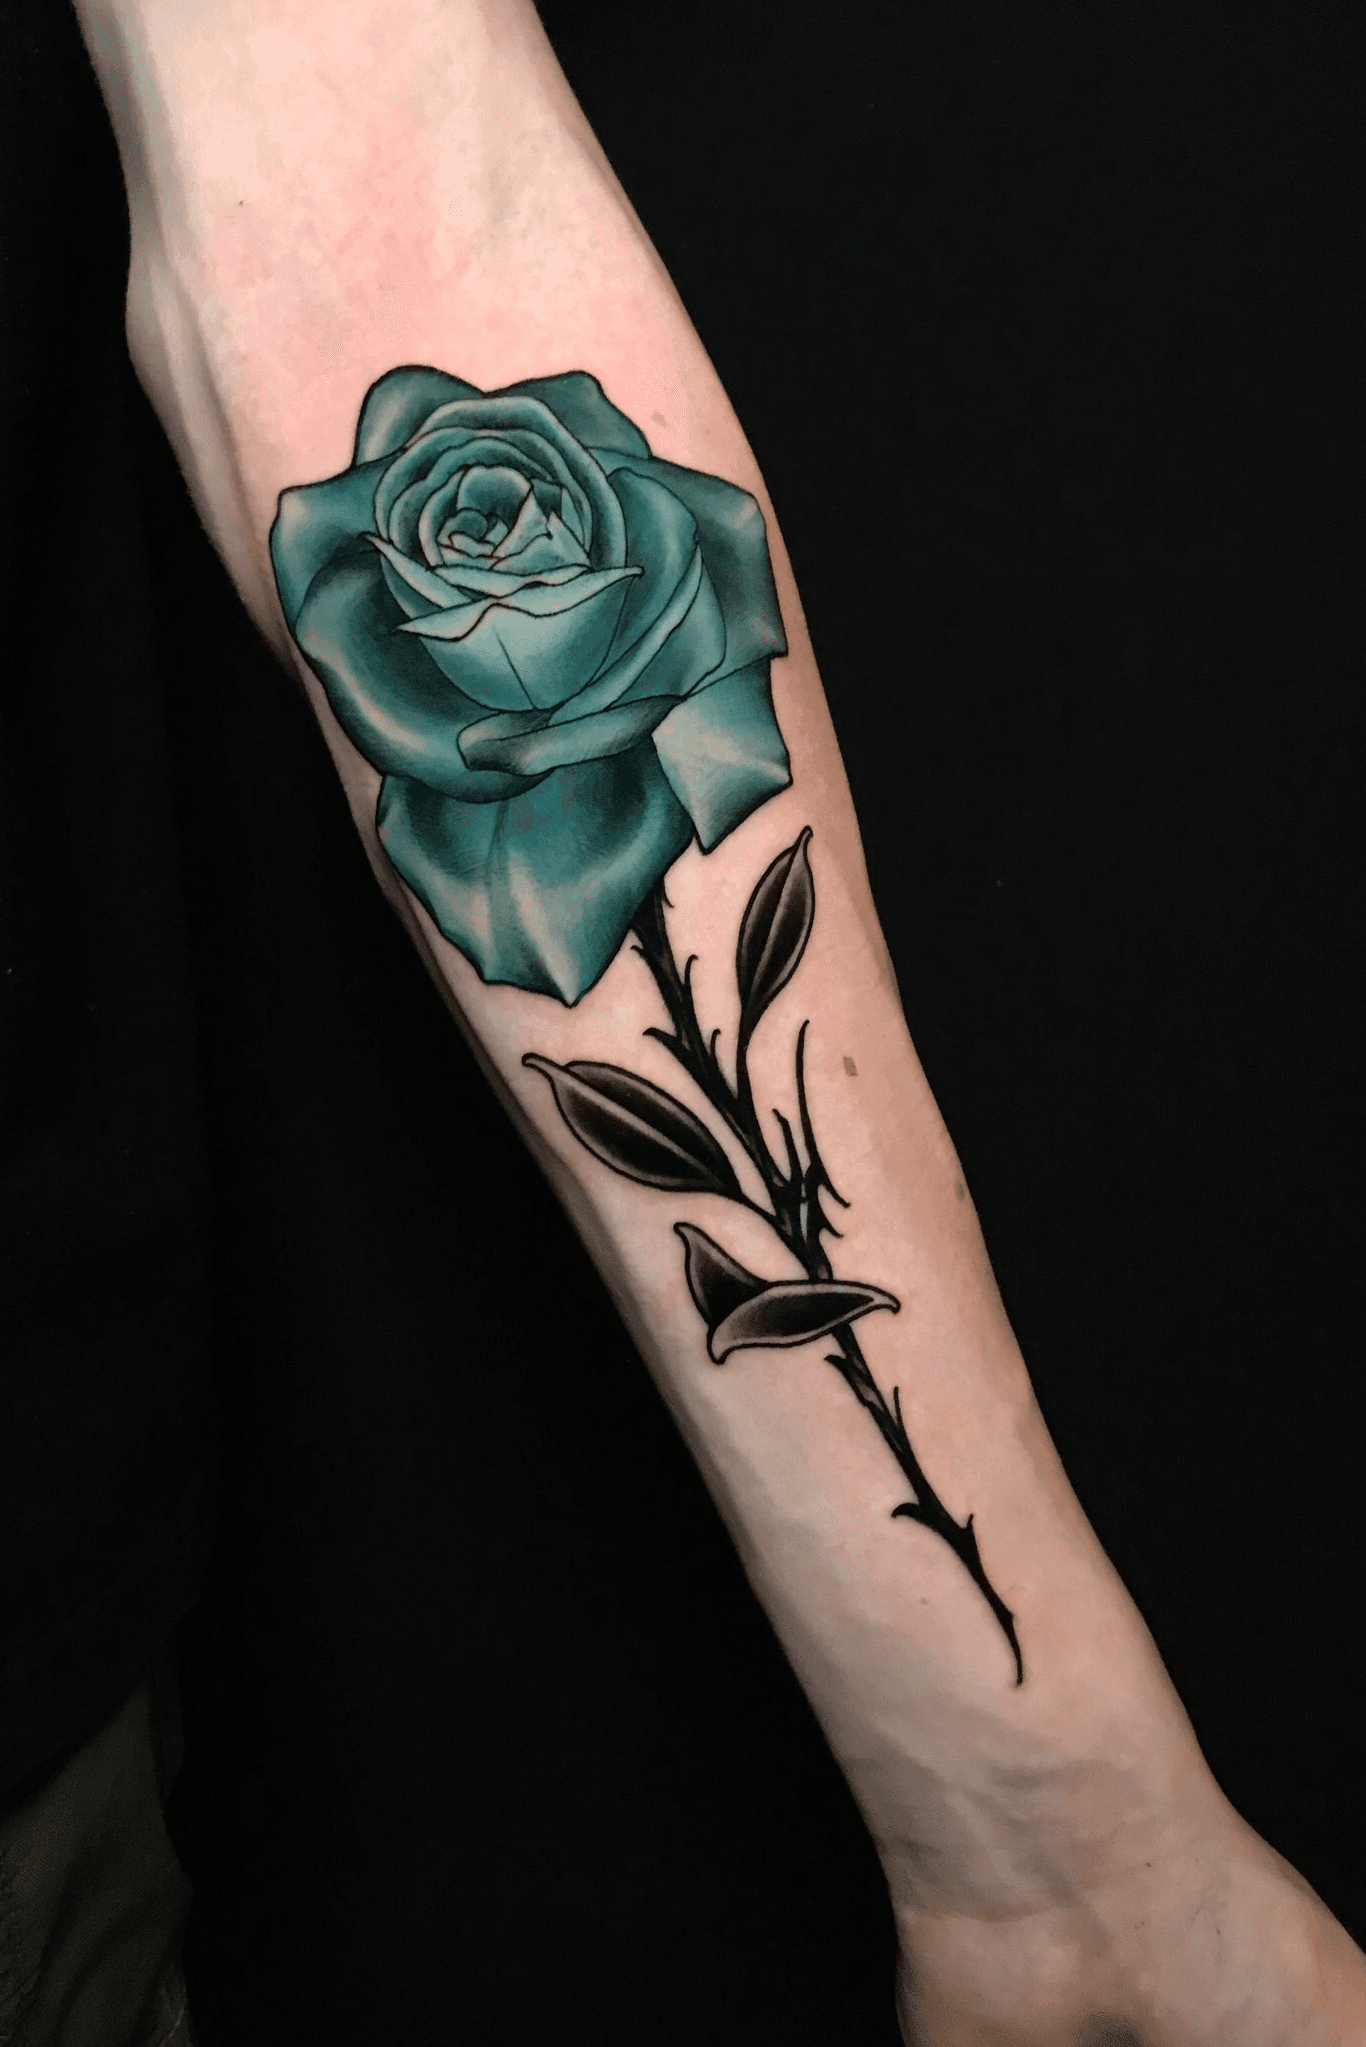 20 Best Blue Rose Tattoo Designs with Ideas with Meanings  Body Art Guru